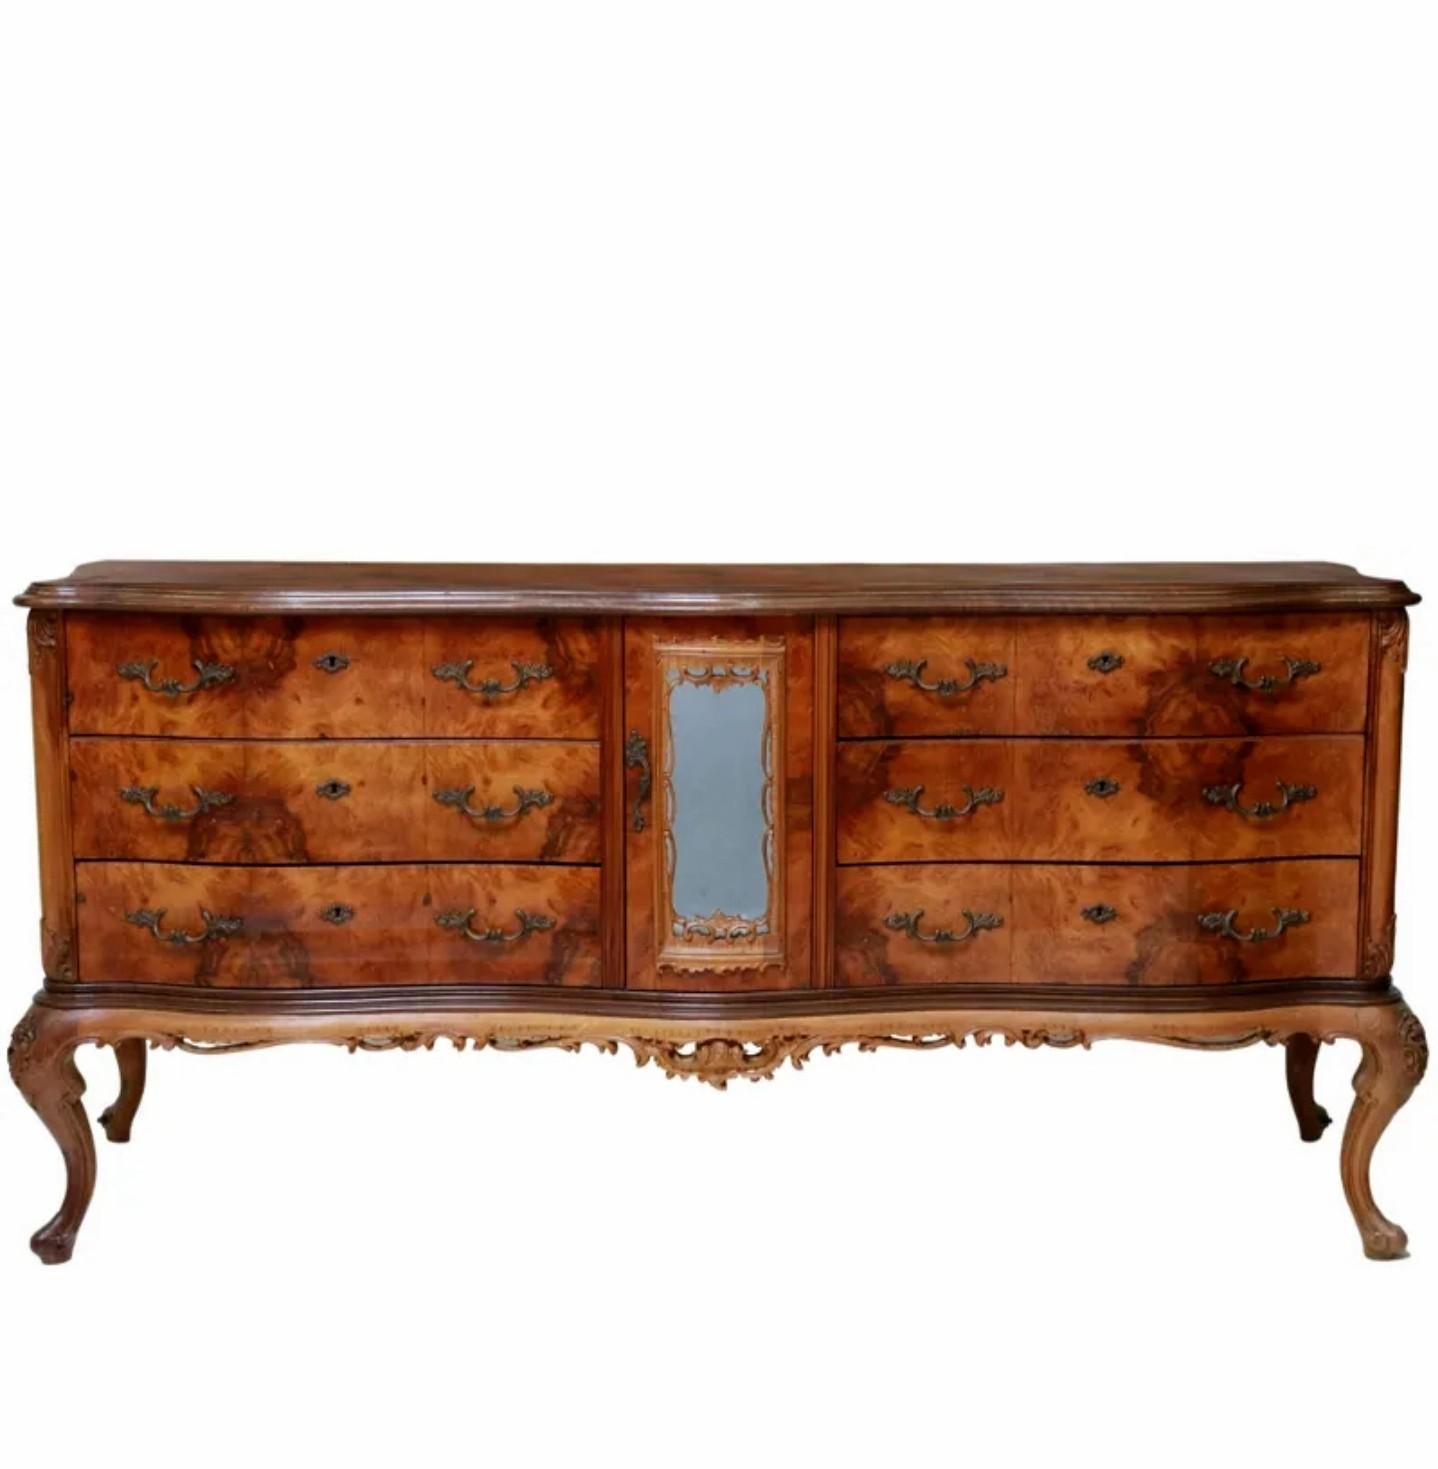 Venetian Baroque Patchwork Burled Walnut Sideboard Buffet In Good Condition For Sale In Forney, TX